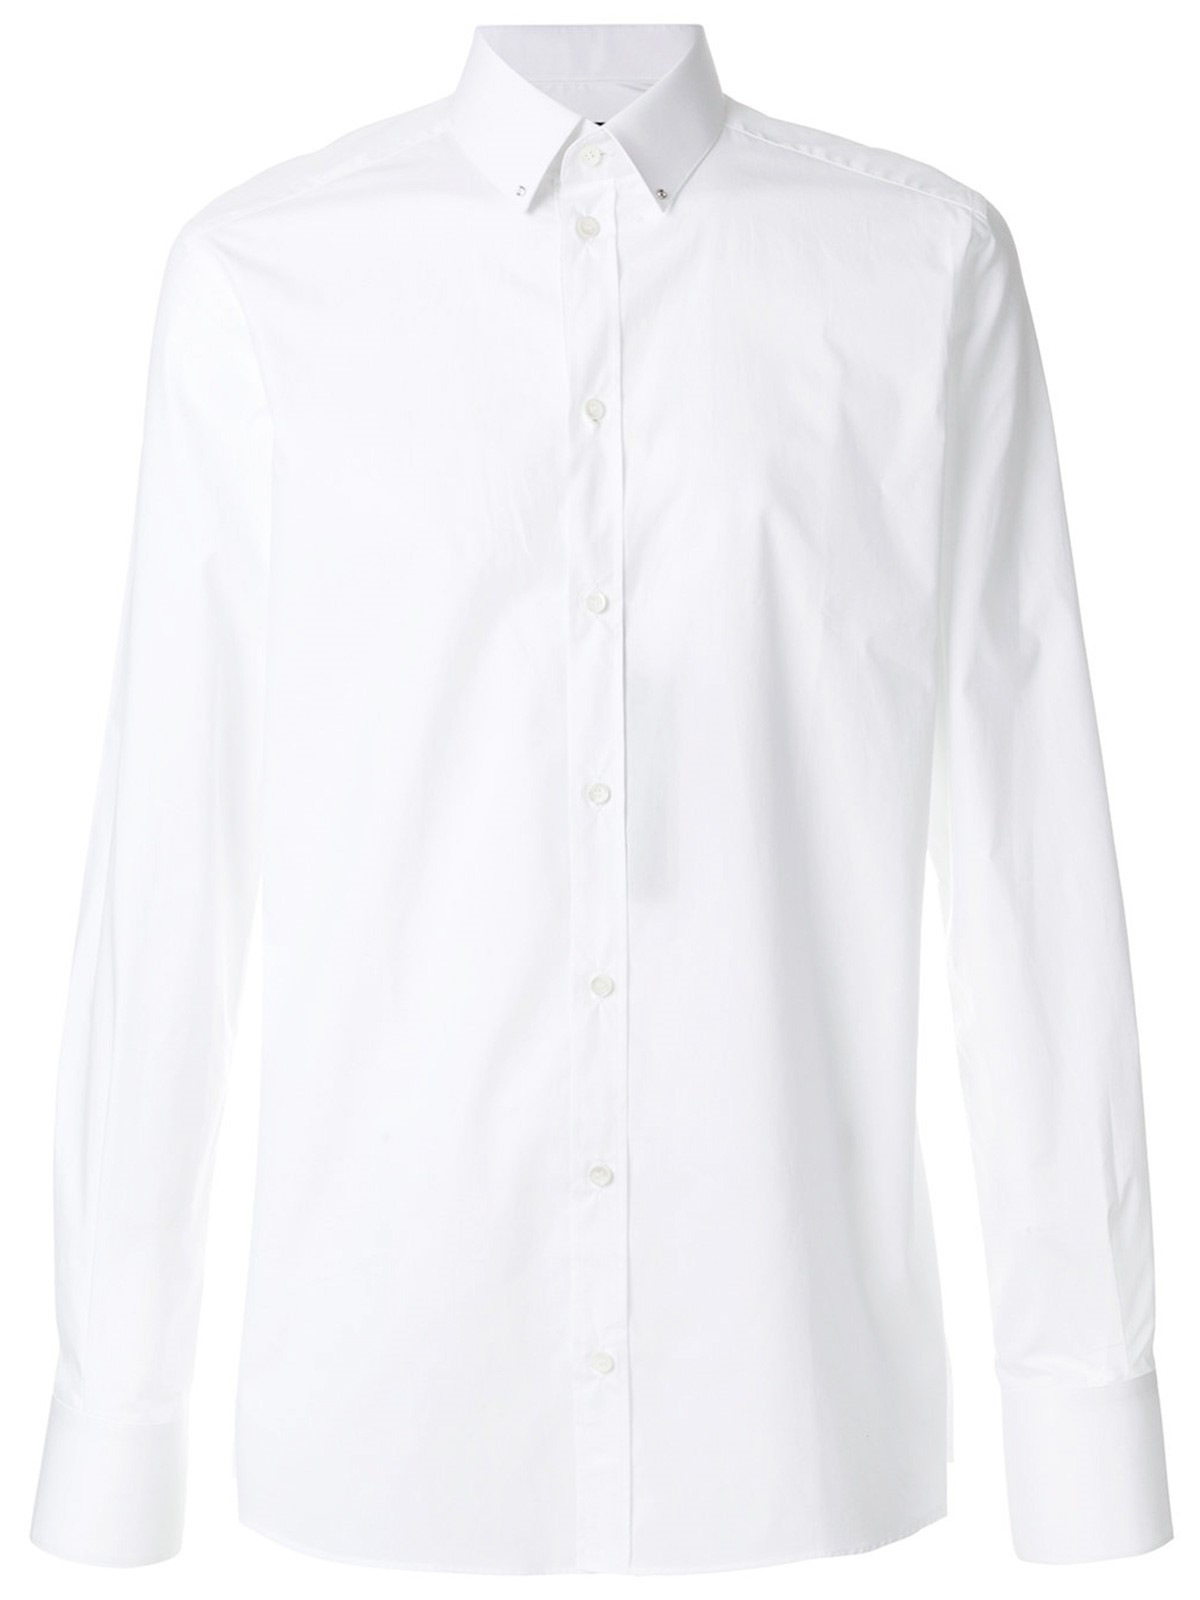 dolce & gabbana SHIRT available on montiboutique.com - 22139